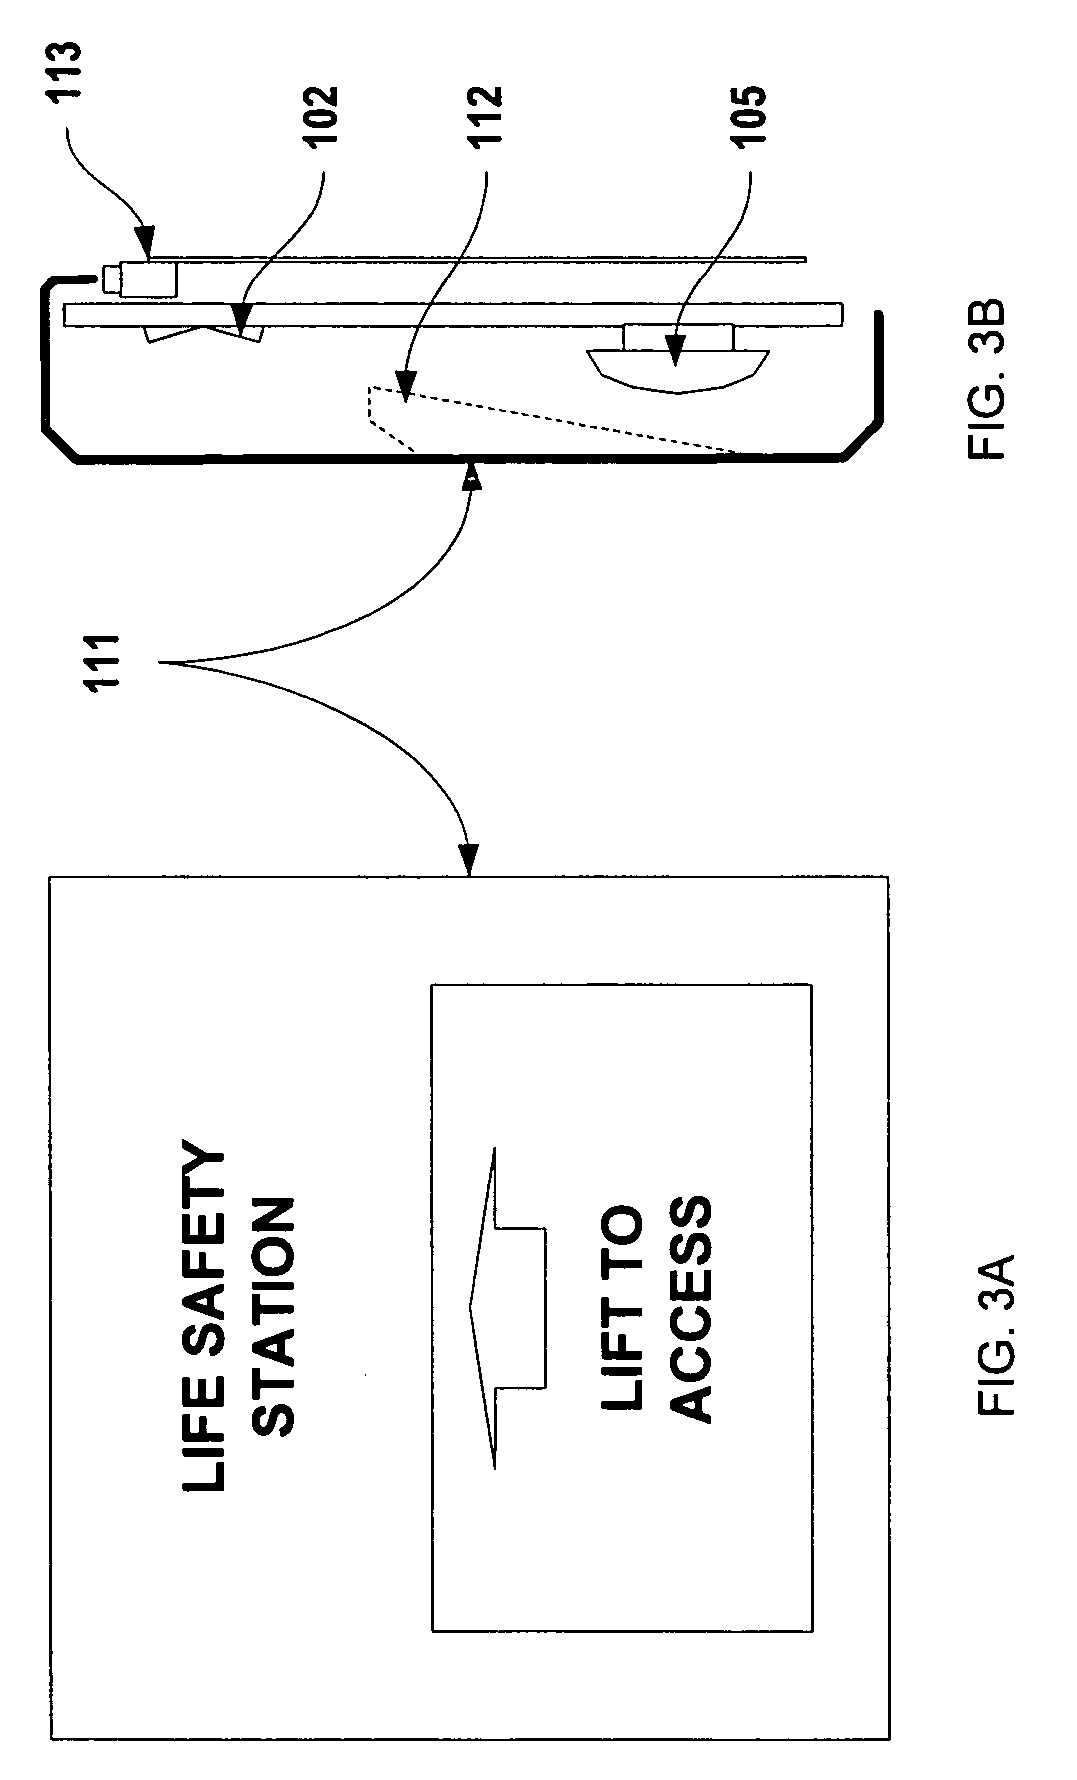 Method and apparatus for providing information regarding an emergency